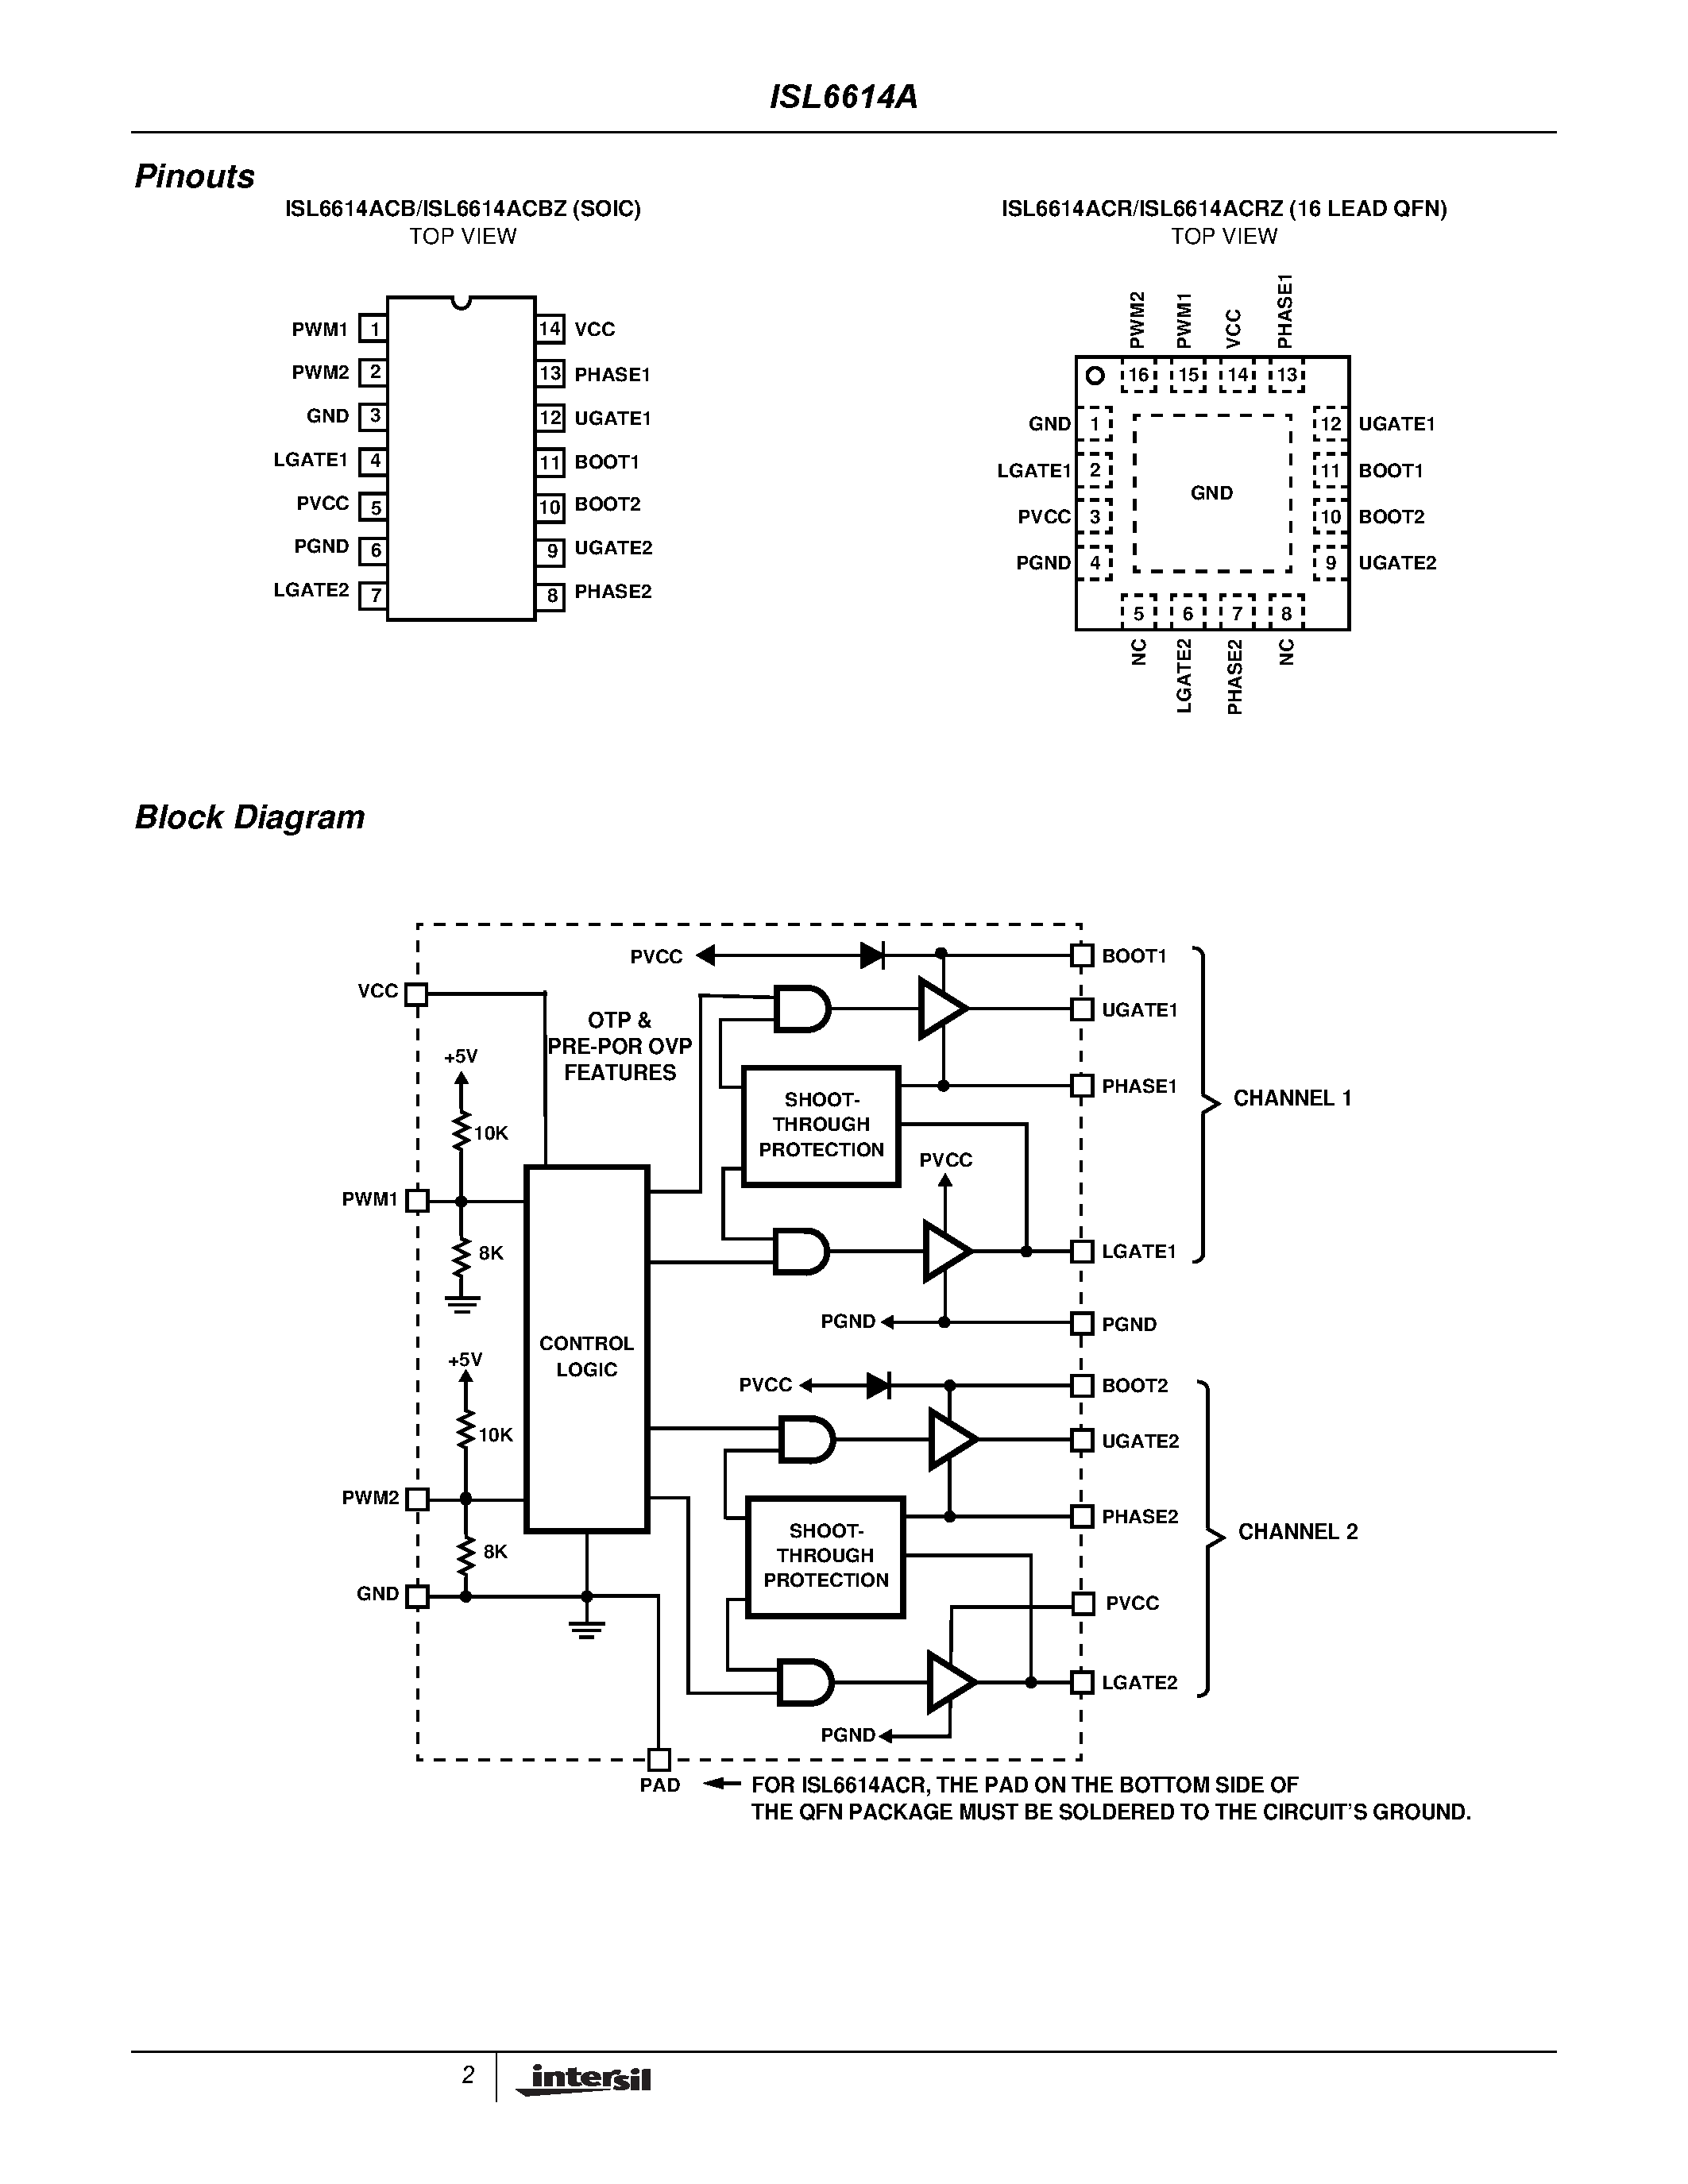 Даташит ISL6614ACR - Dual Advanced Synchronous Rectified Buck MOSFET Drivers with Pre-POR OVP страница 2